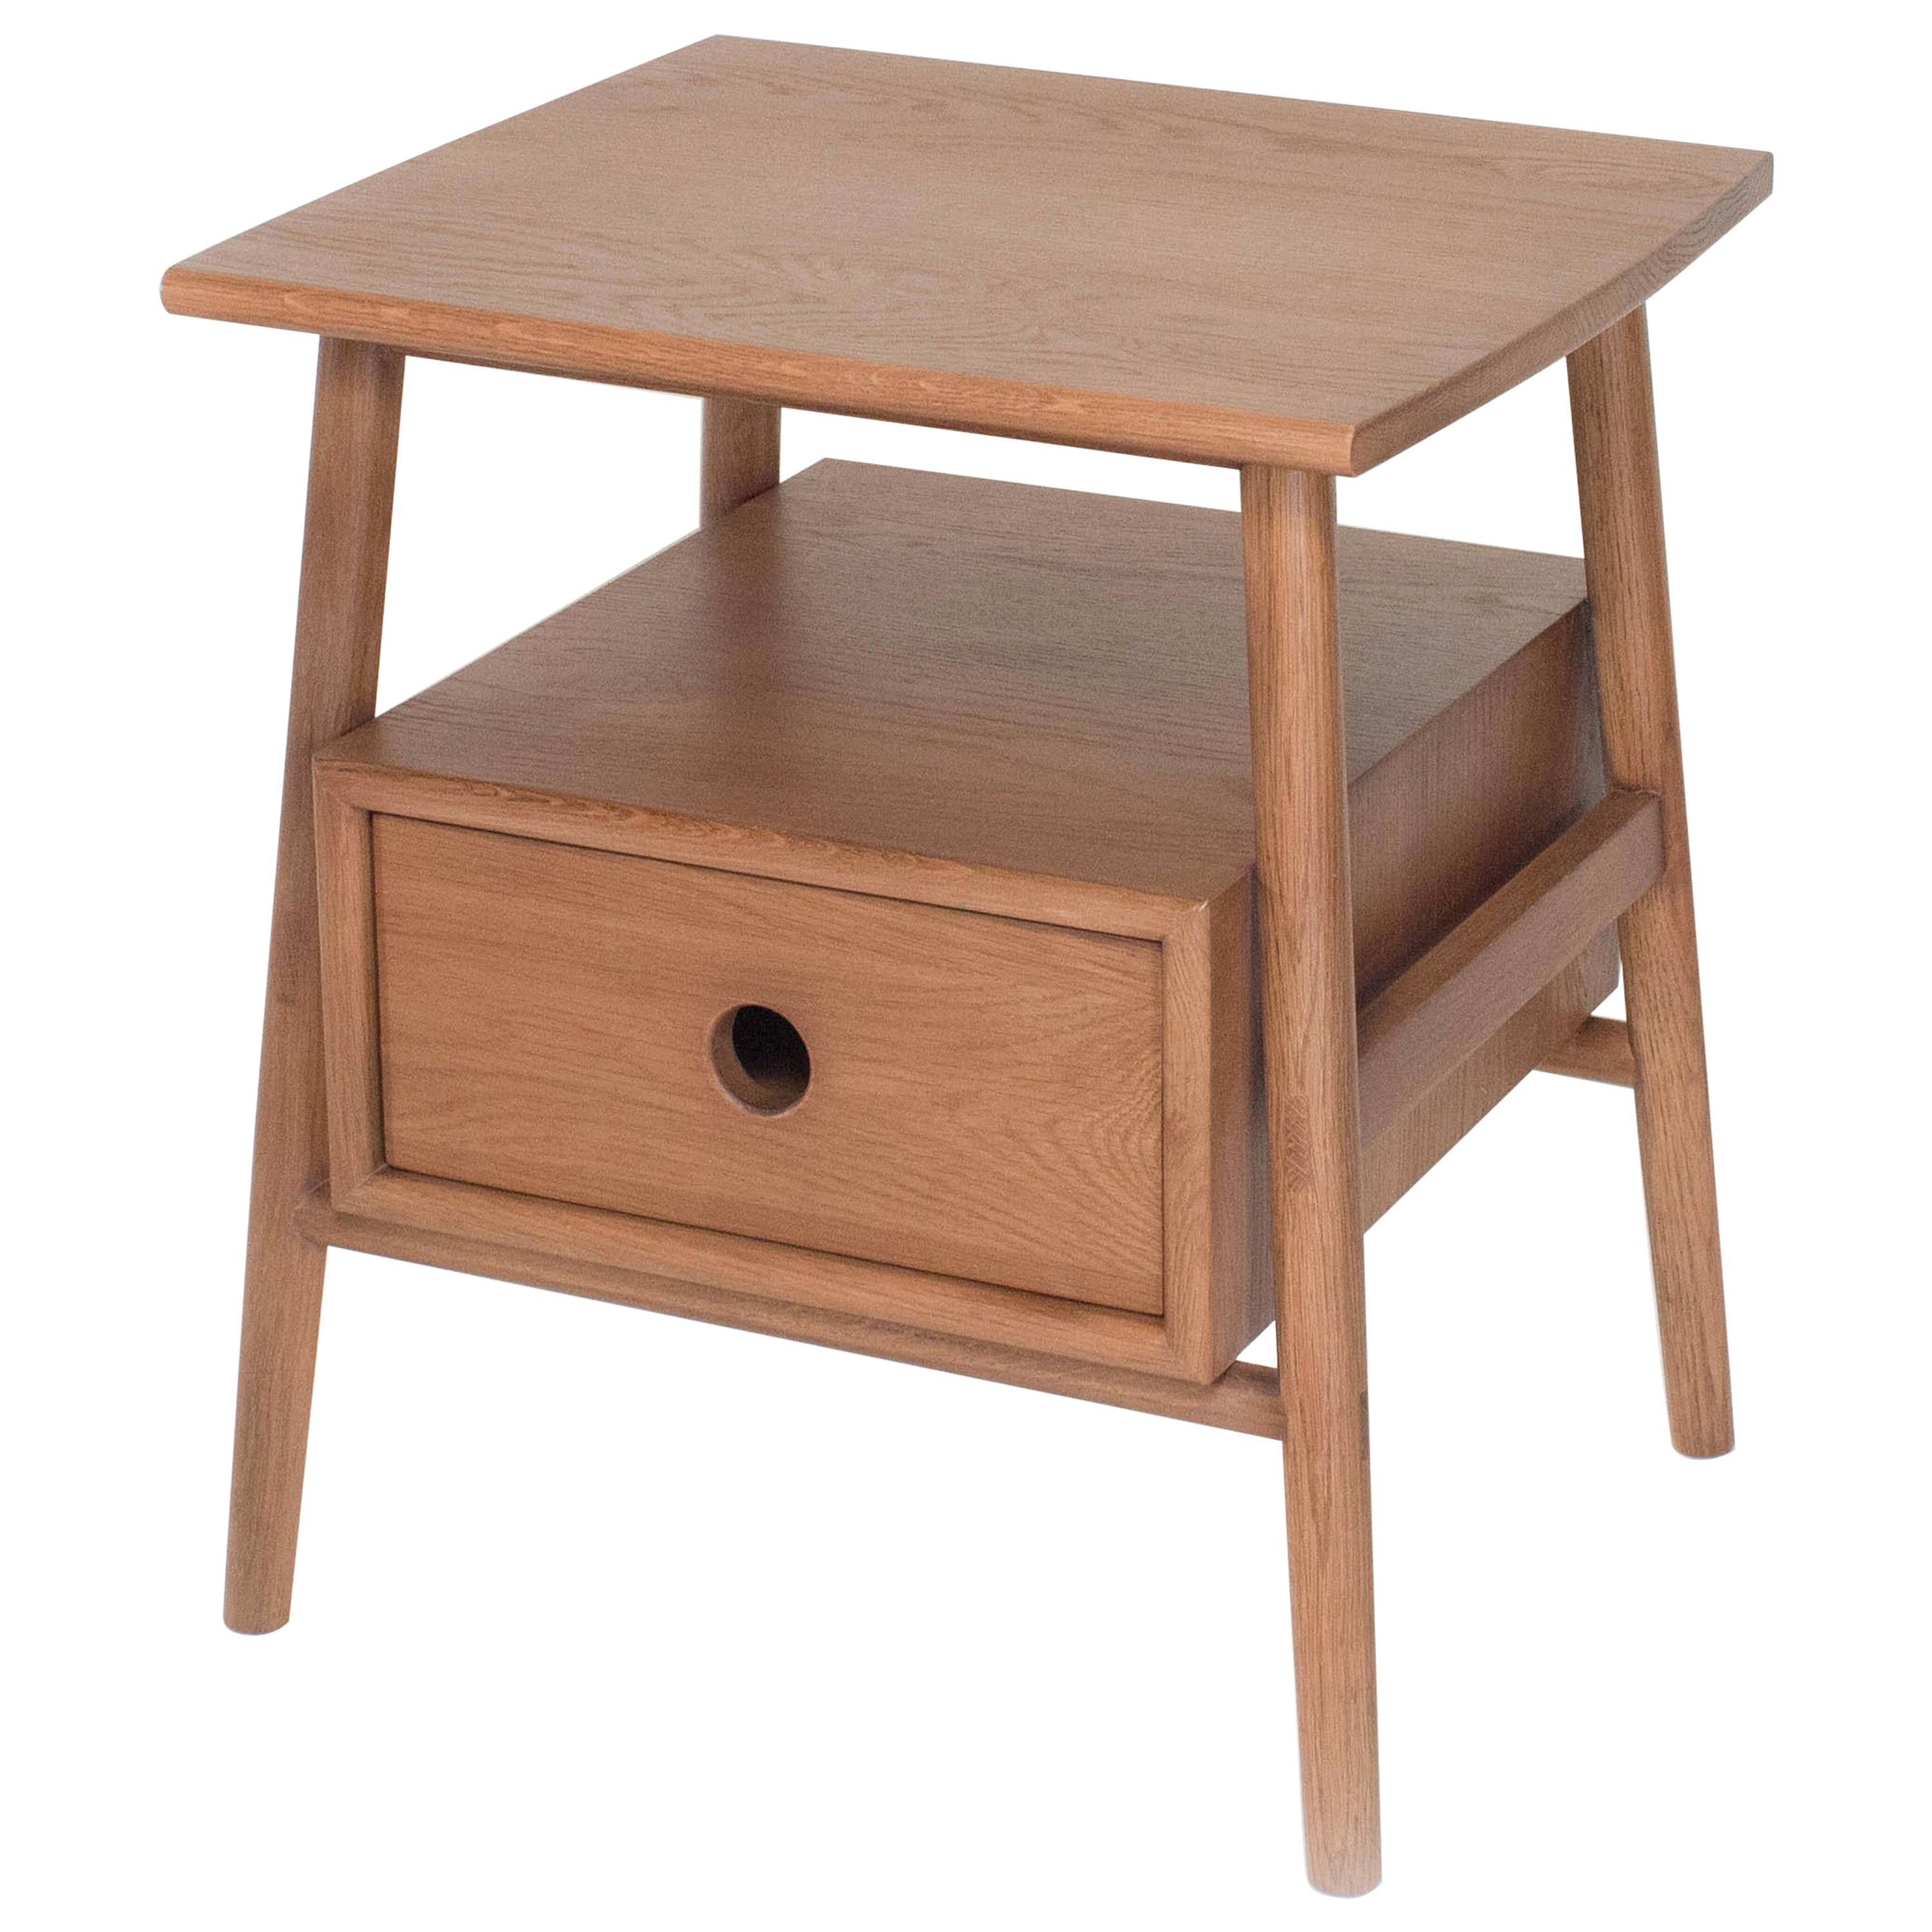 Sitka Side Table by Sun at Six, Sienna, Minimalist Accent Table in Wood For Sale